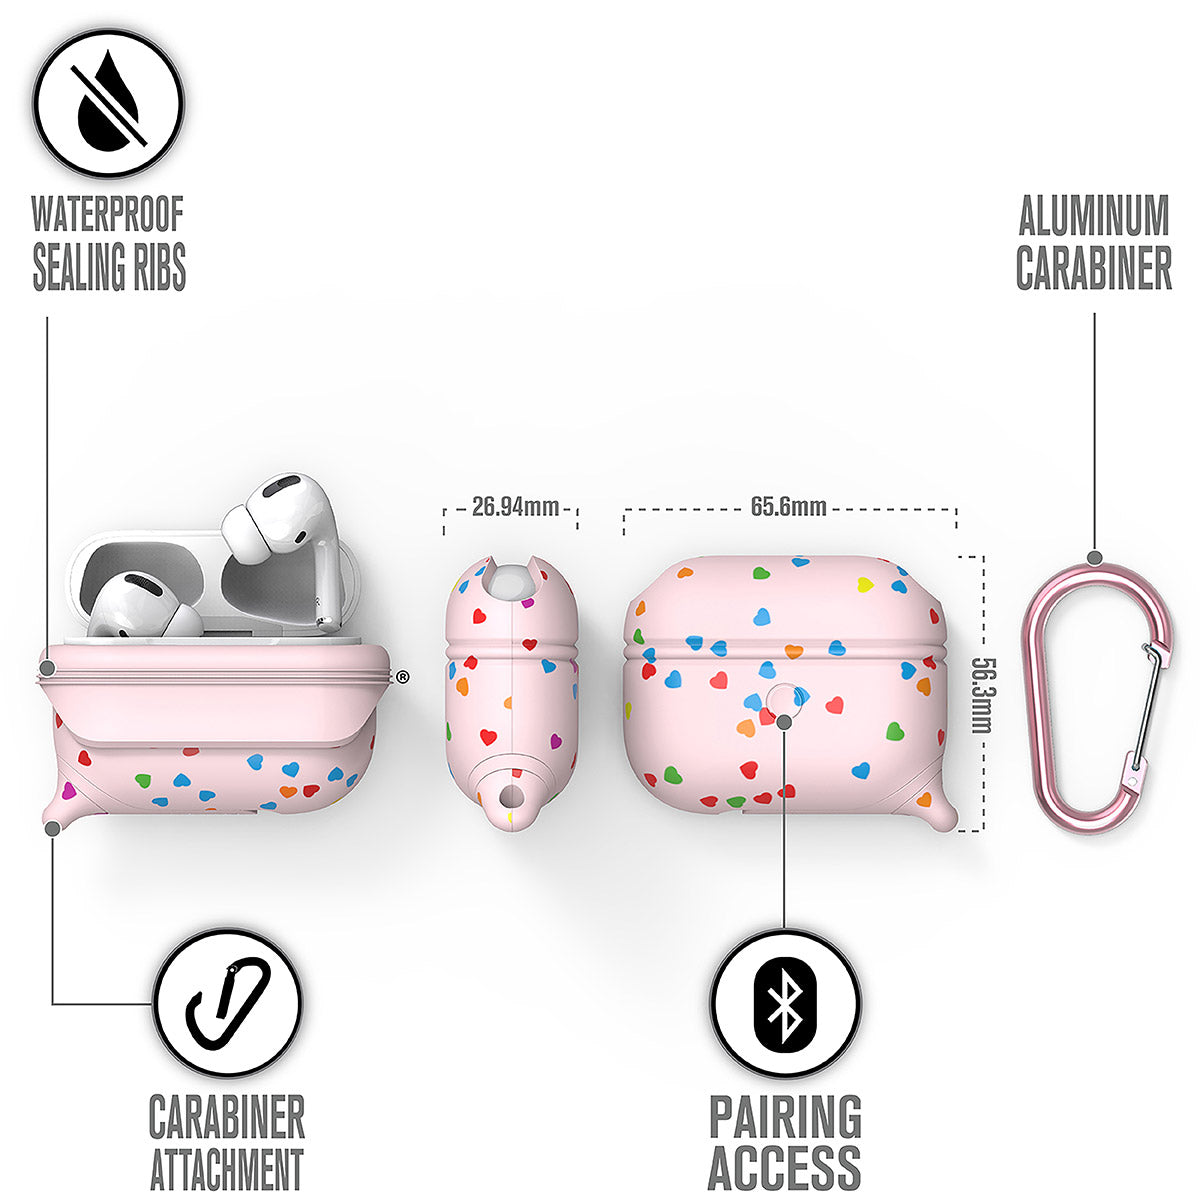 CATAPLAPDPROSWT | catalyst airpods pro gen 2 1 waterproof case carabiner special edition pink with hearts different views showing the sealing ribs carabiner attachment loop and pairing access text reads waterproof sealing ribs aluminum carabiner carabiner attachment pairing access